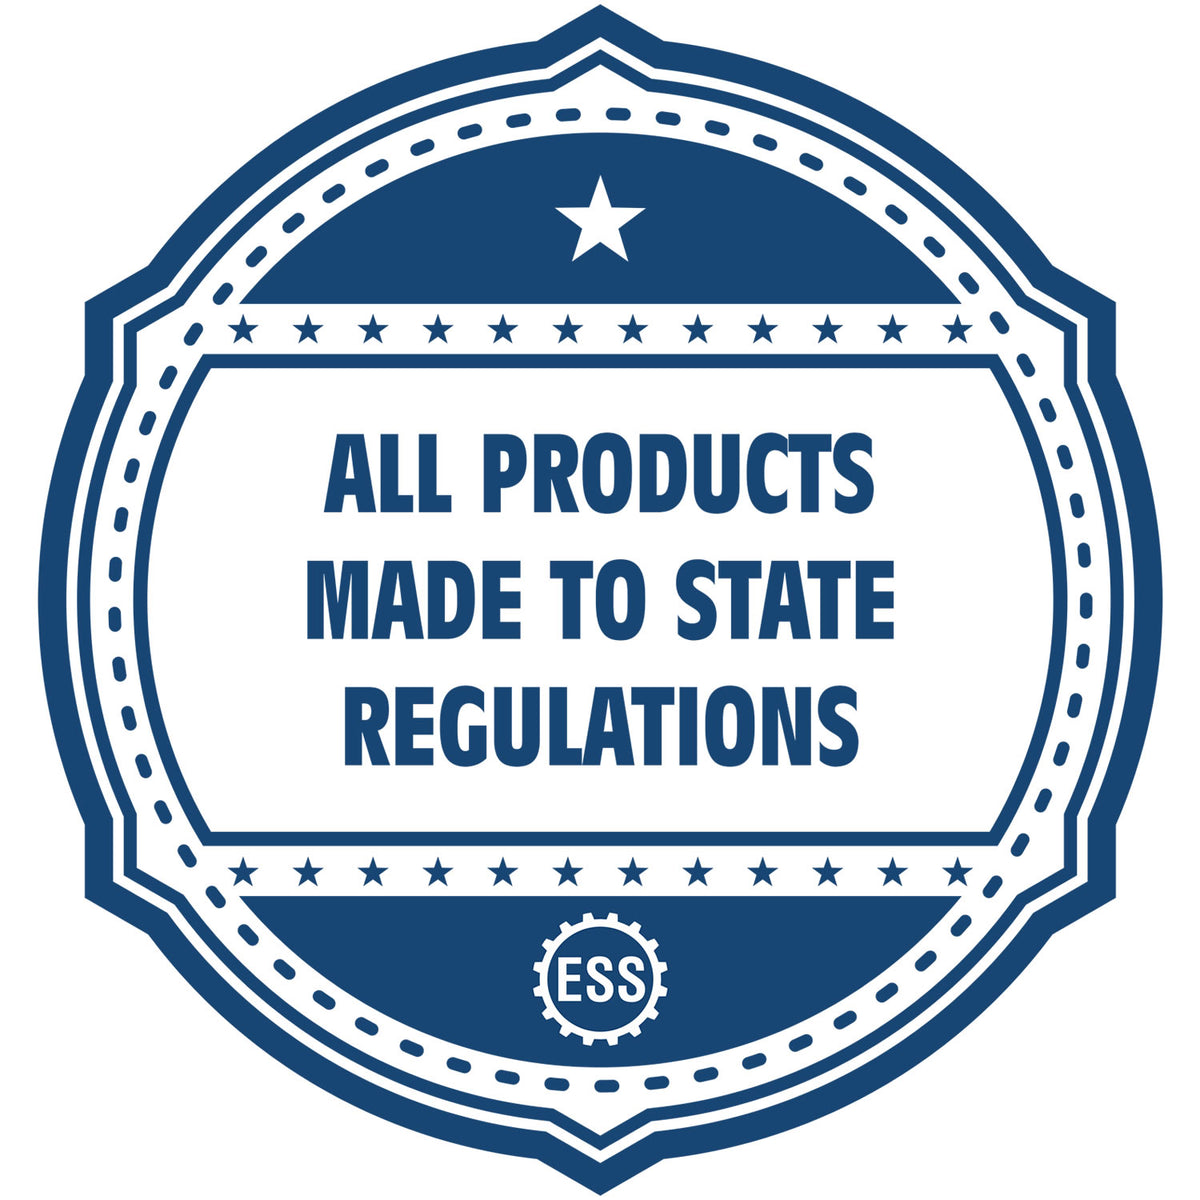 A blue icon or badge for the Heavy Duty Cast Iron Oregon Geologist Seal Embosser showing that this product is made in compliance with state regulations.